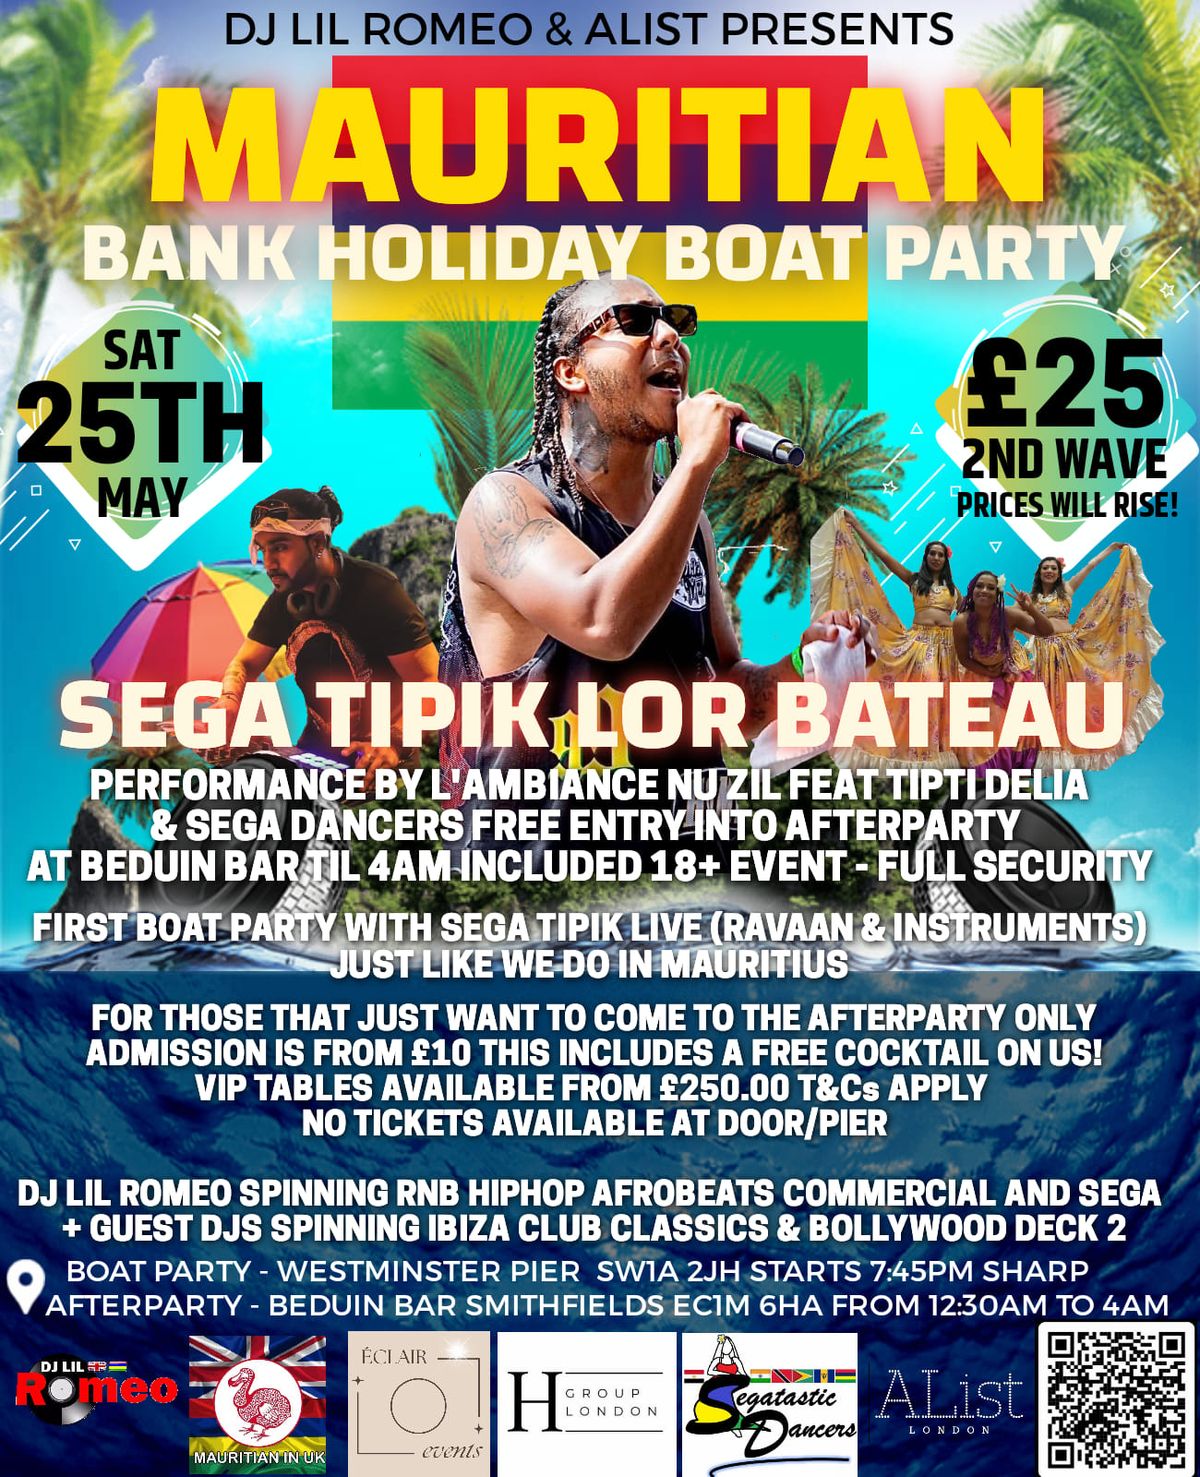 SUMMER BANK HOLIDAY MAURITIAN BOAT PARTY